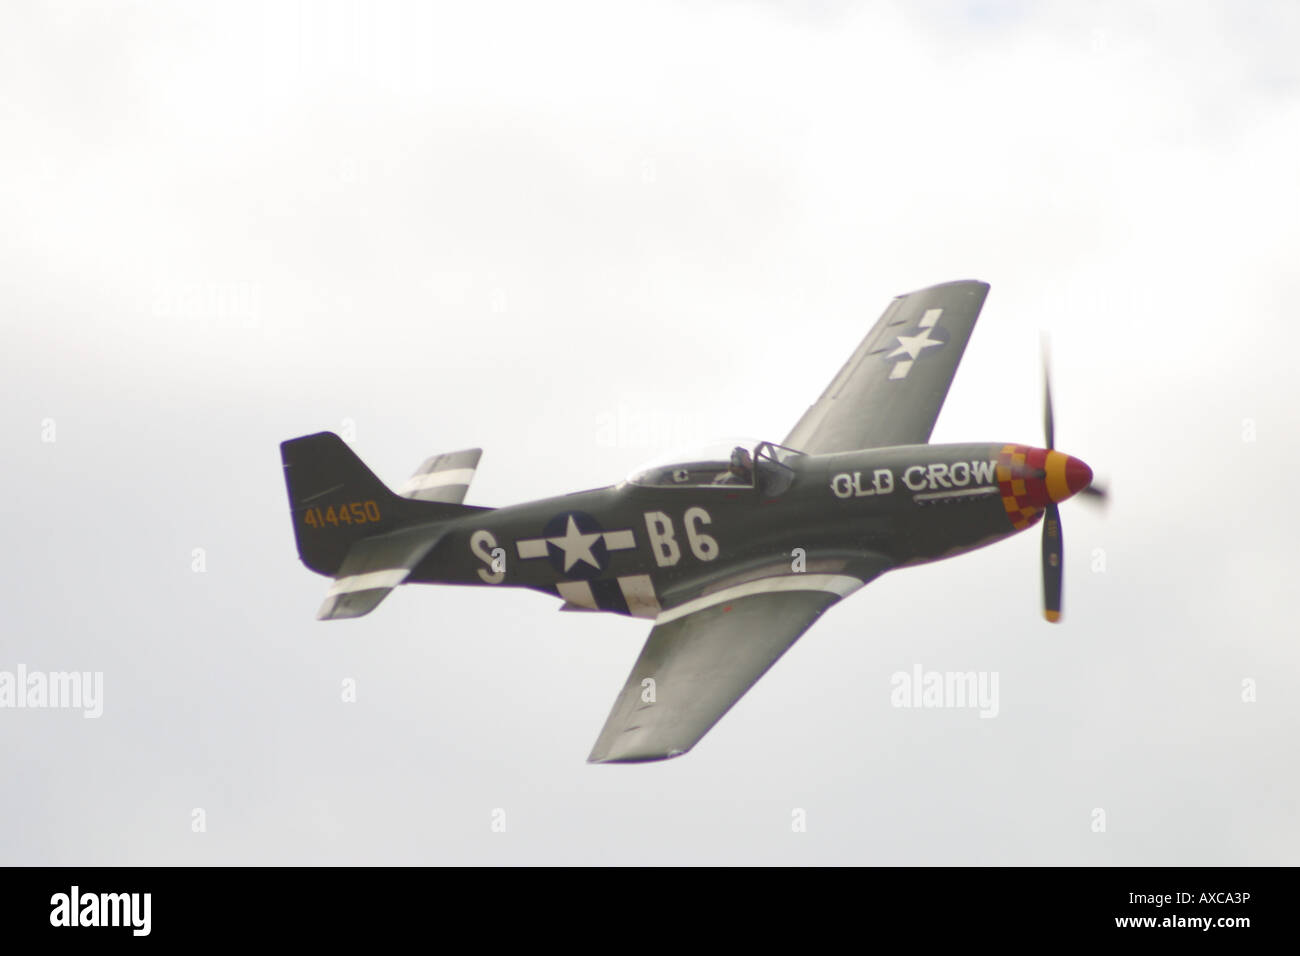 Prop motore fighter training piano cielo aereo southport air show merseyside Foto Stock